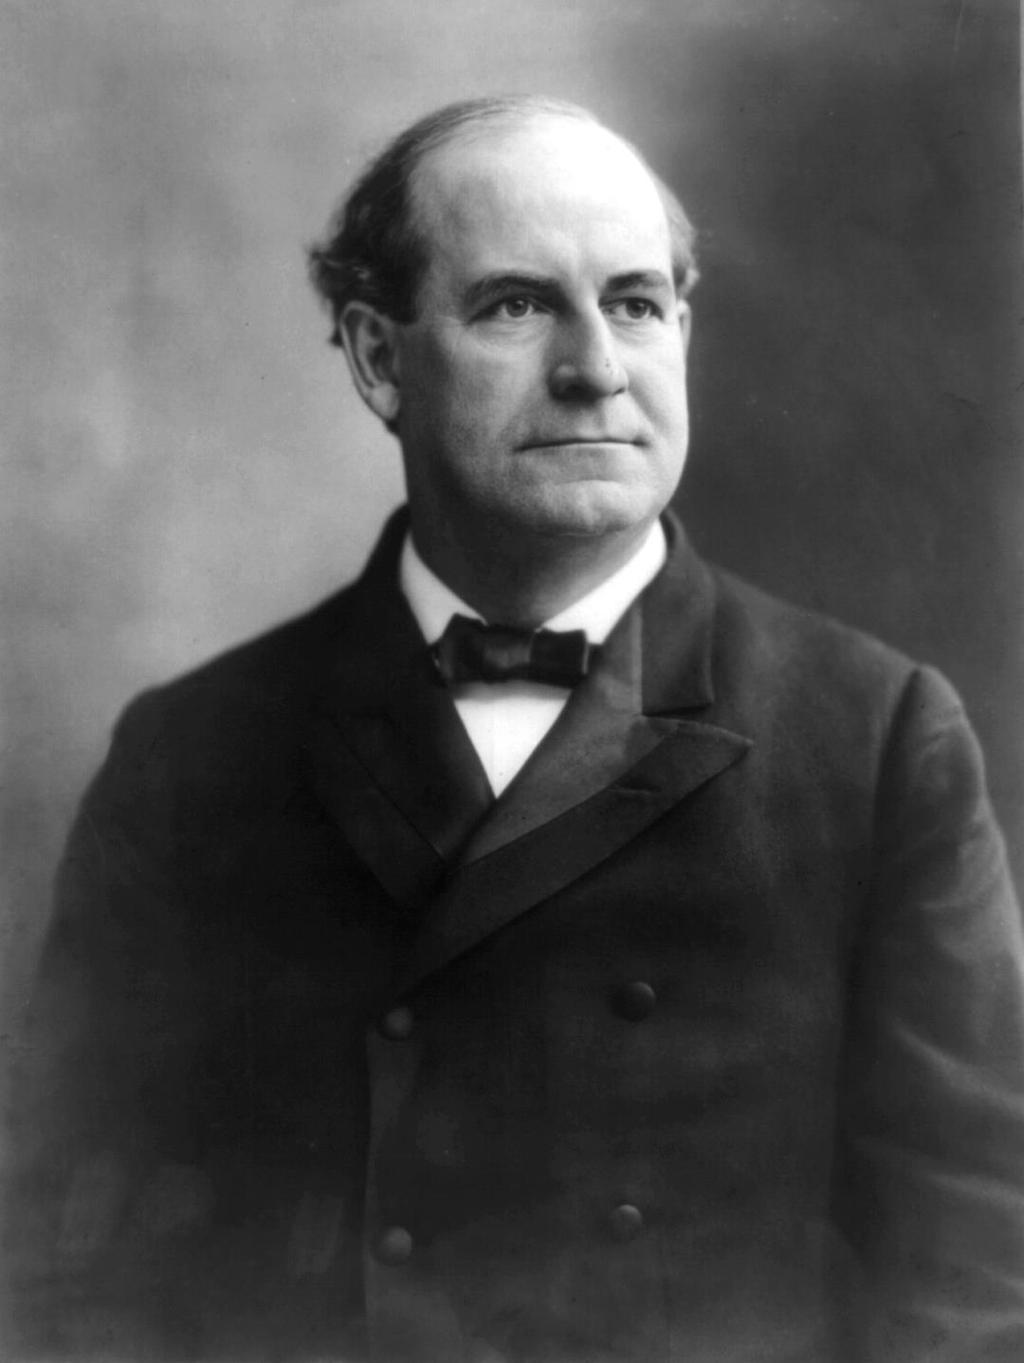 William Jennings Bryan Only 36 when Democrats & Populists nominated him for